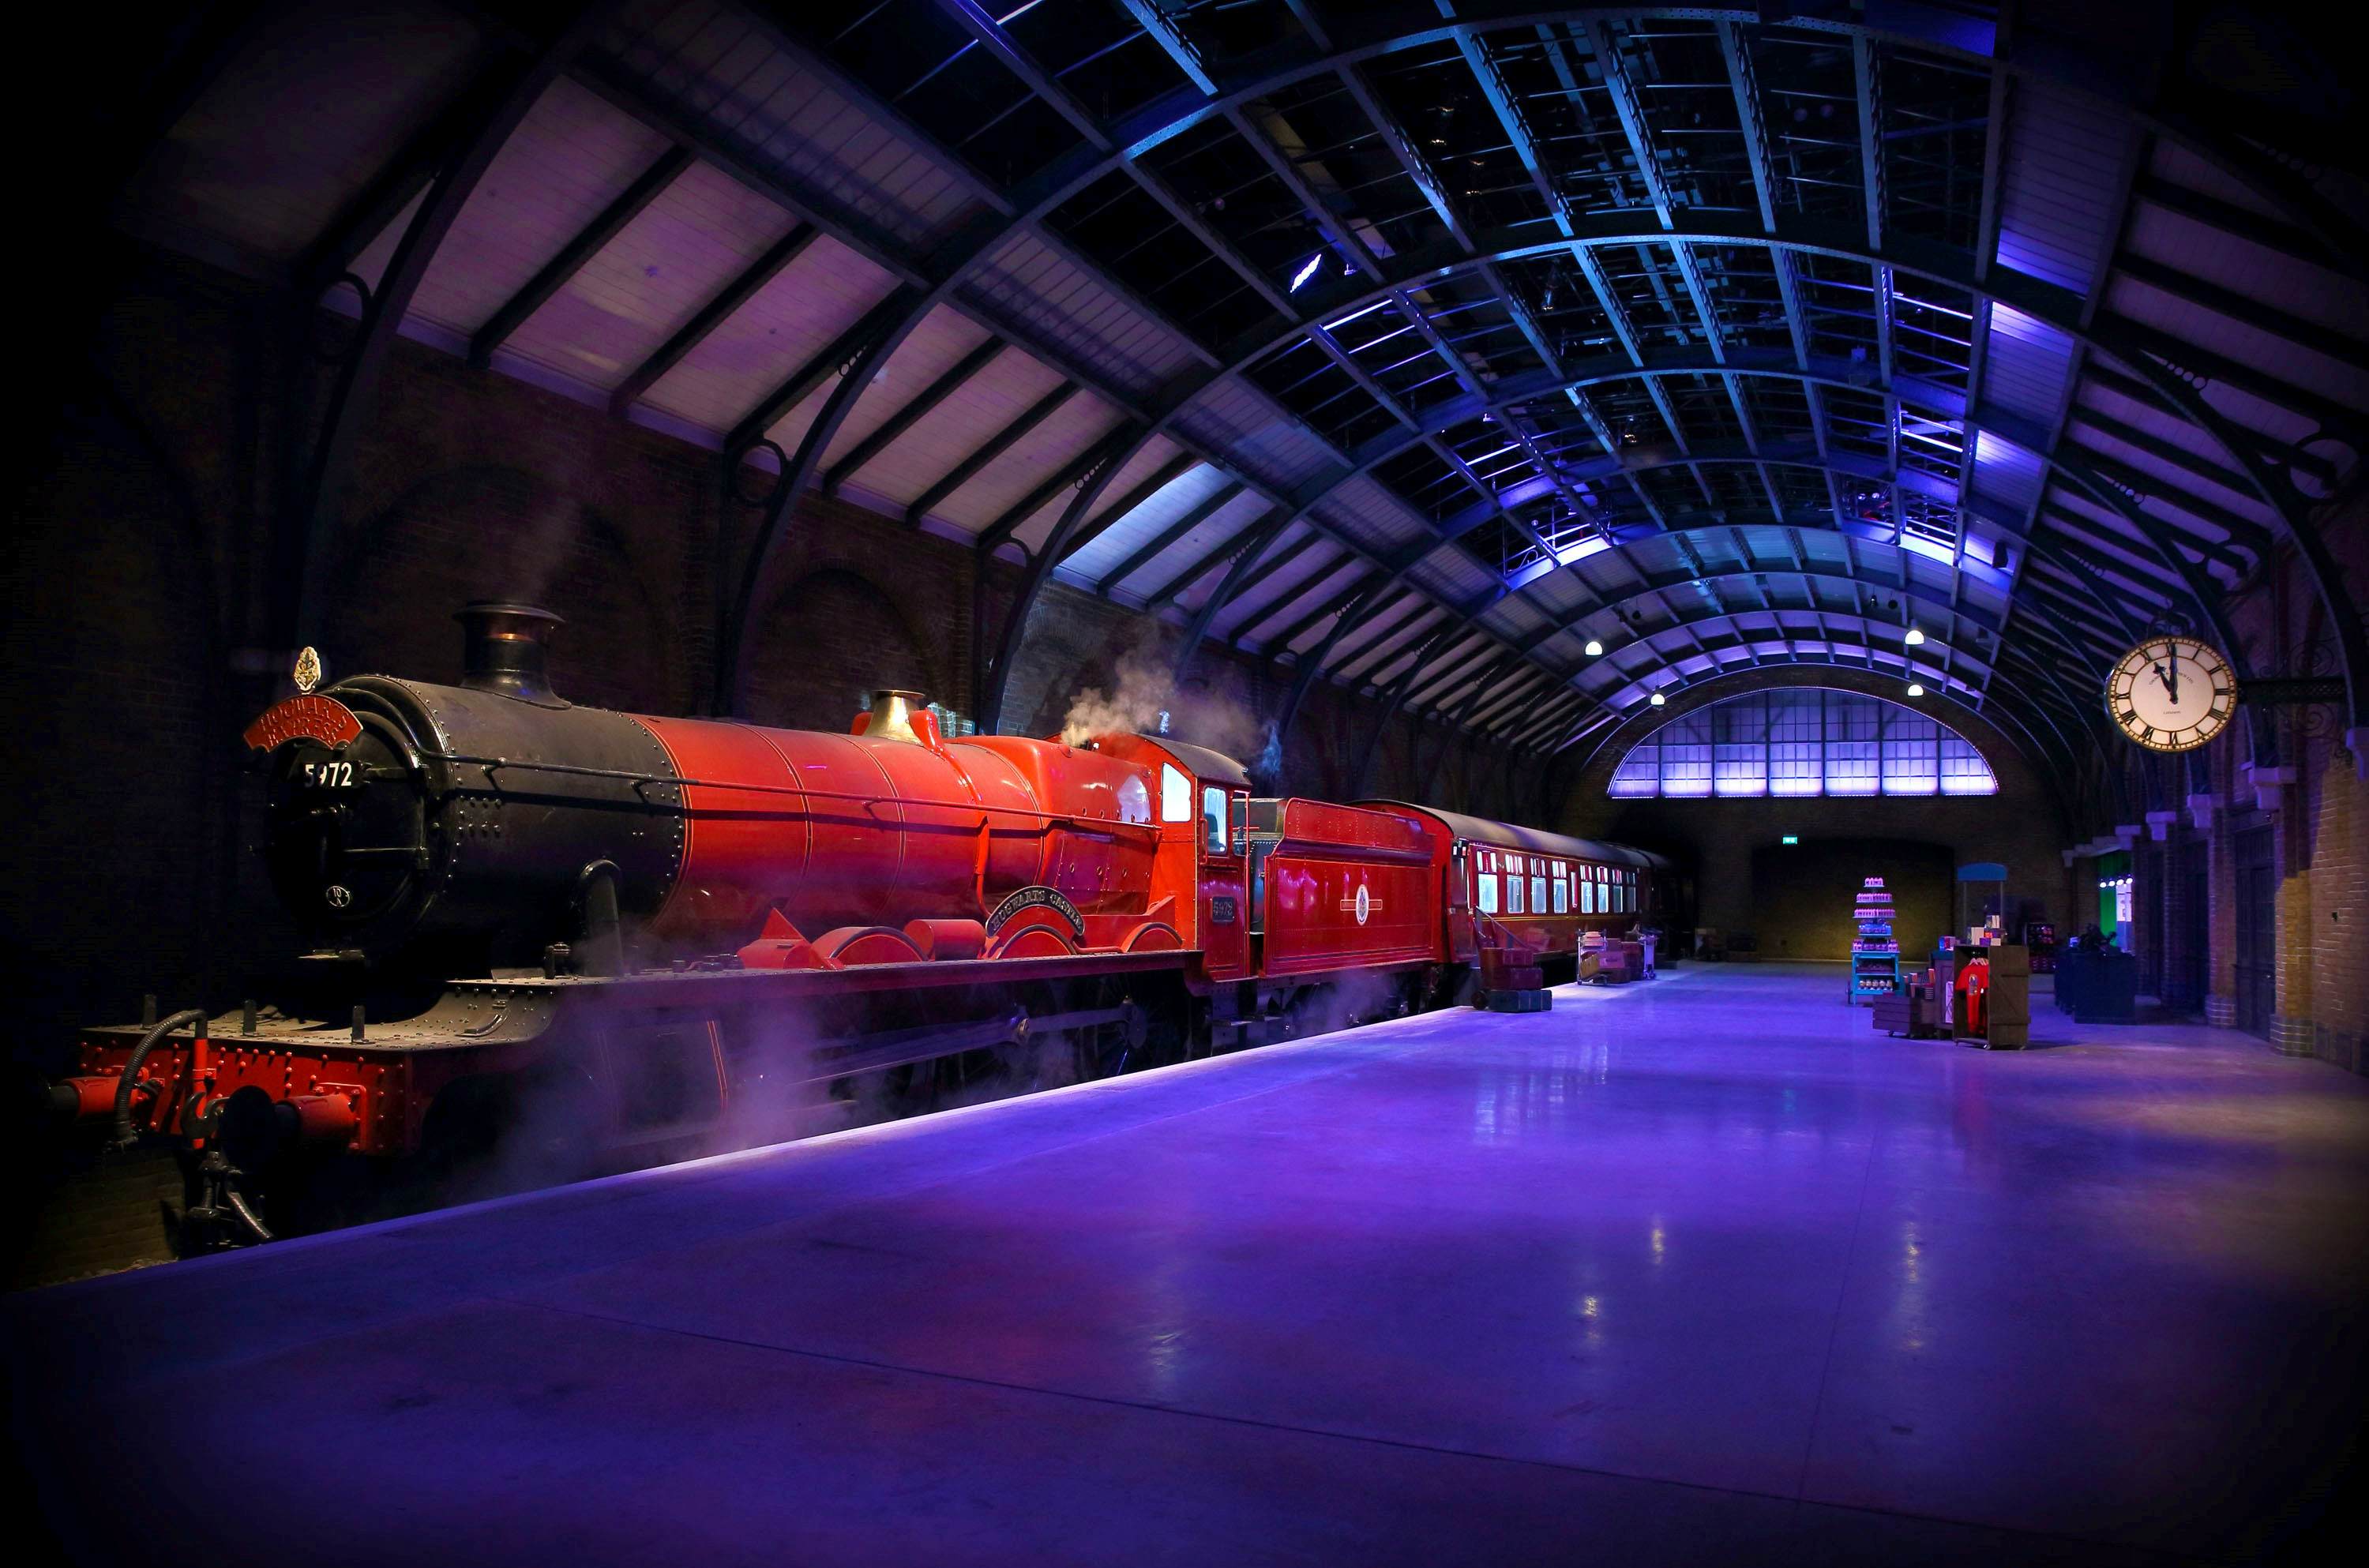 Warner Bros. Studio: The Making of Harry Potter - Admission Tickets only